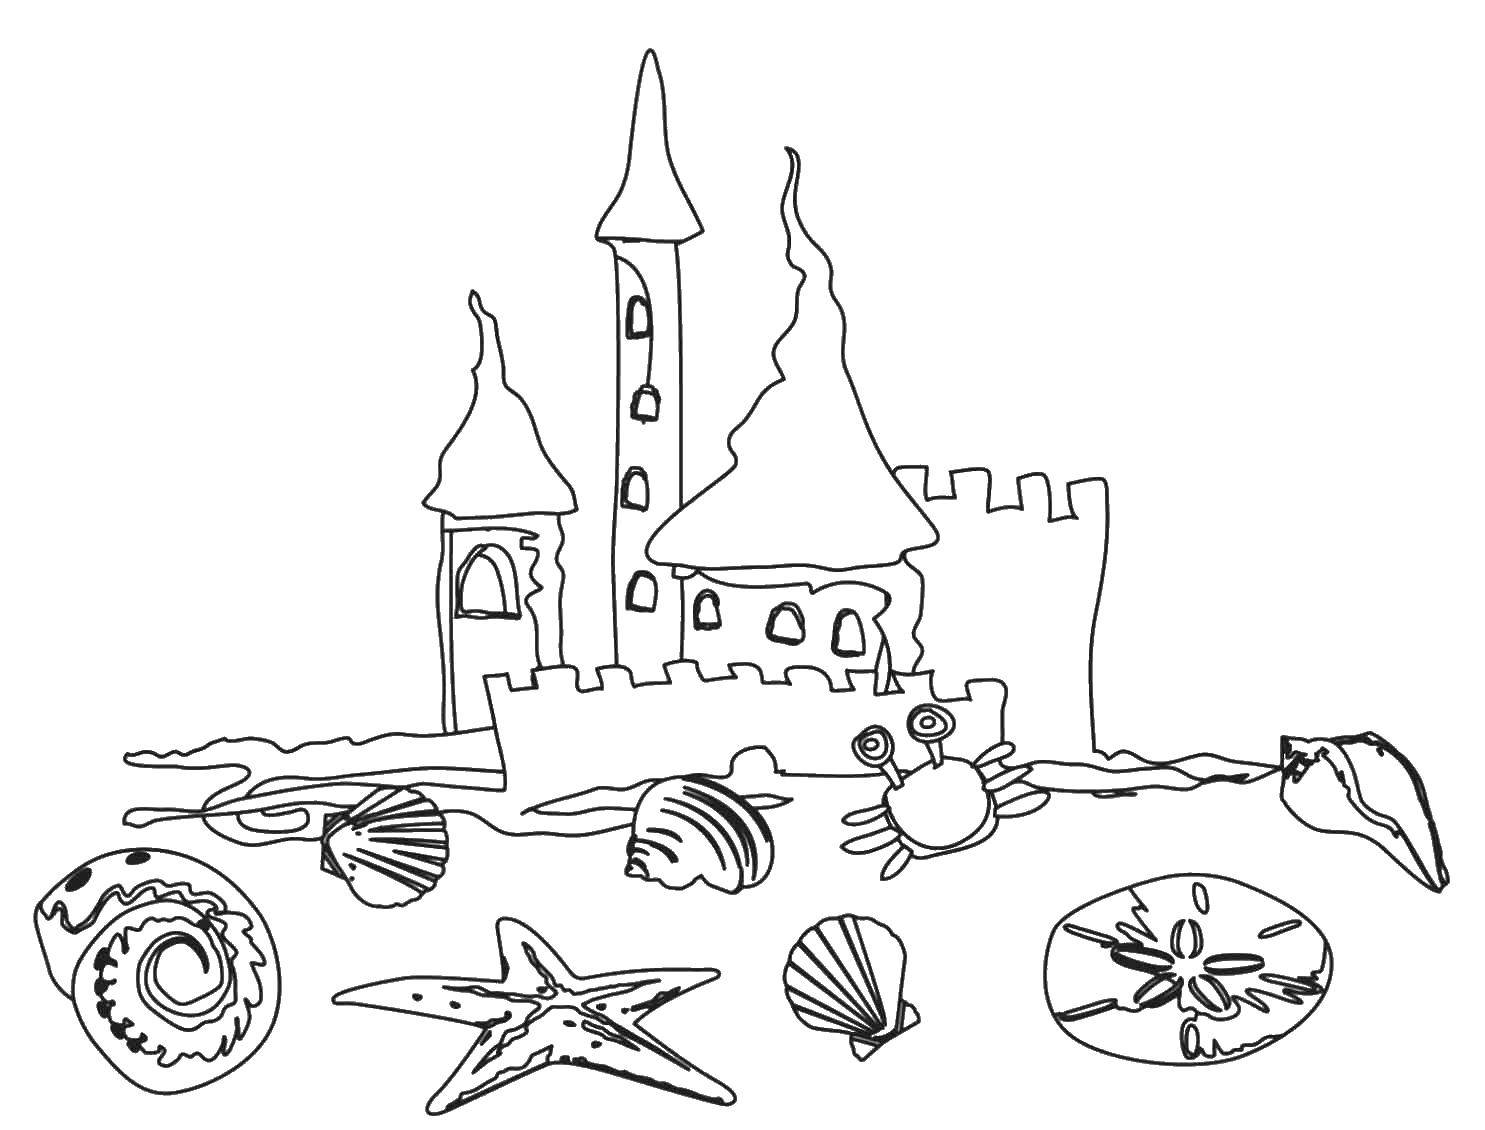 Coloring Sea castle. Category Beach. Tags:  Beach, sand castle, crab, ball, starfish.